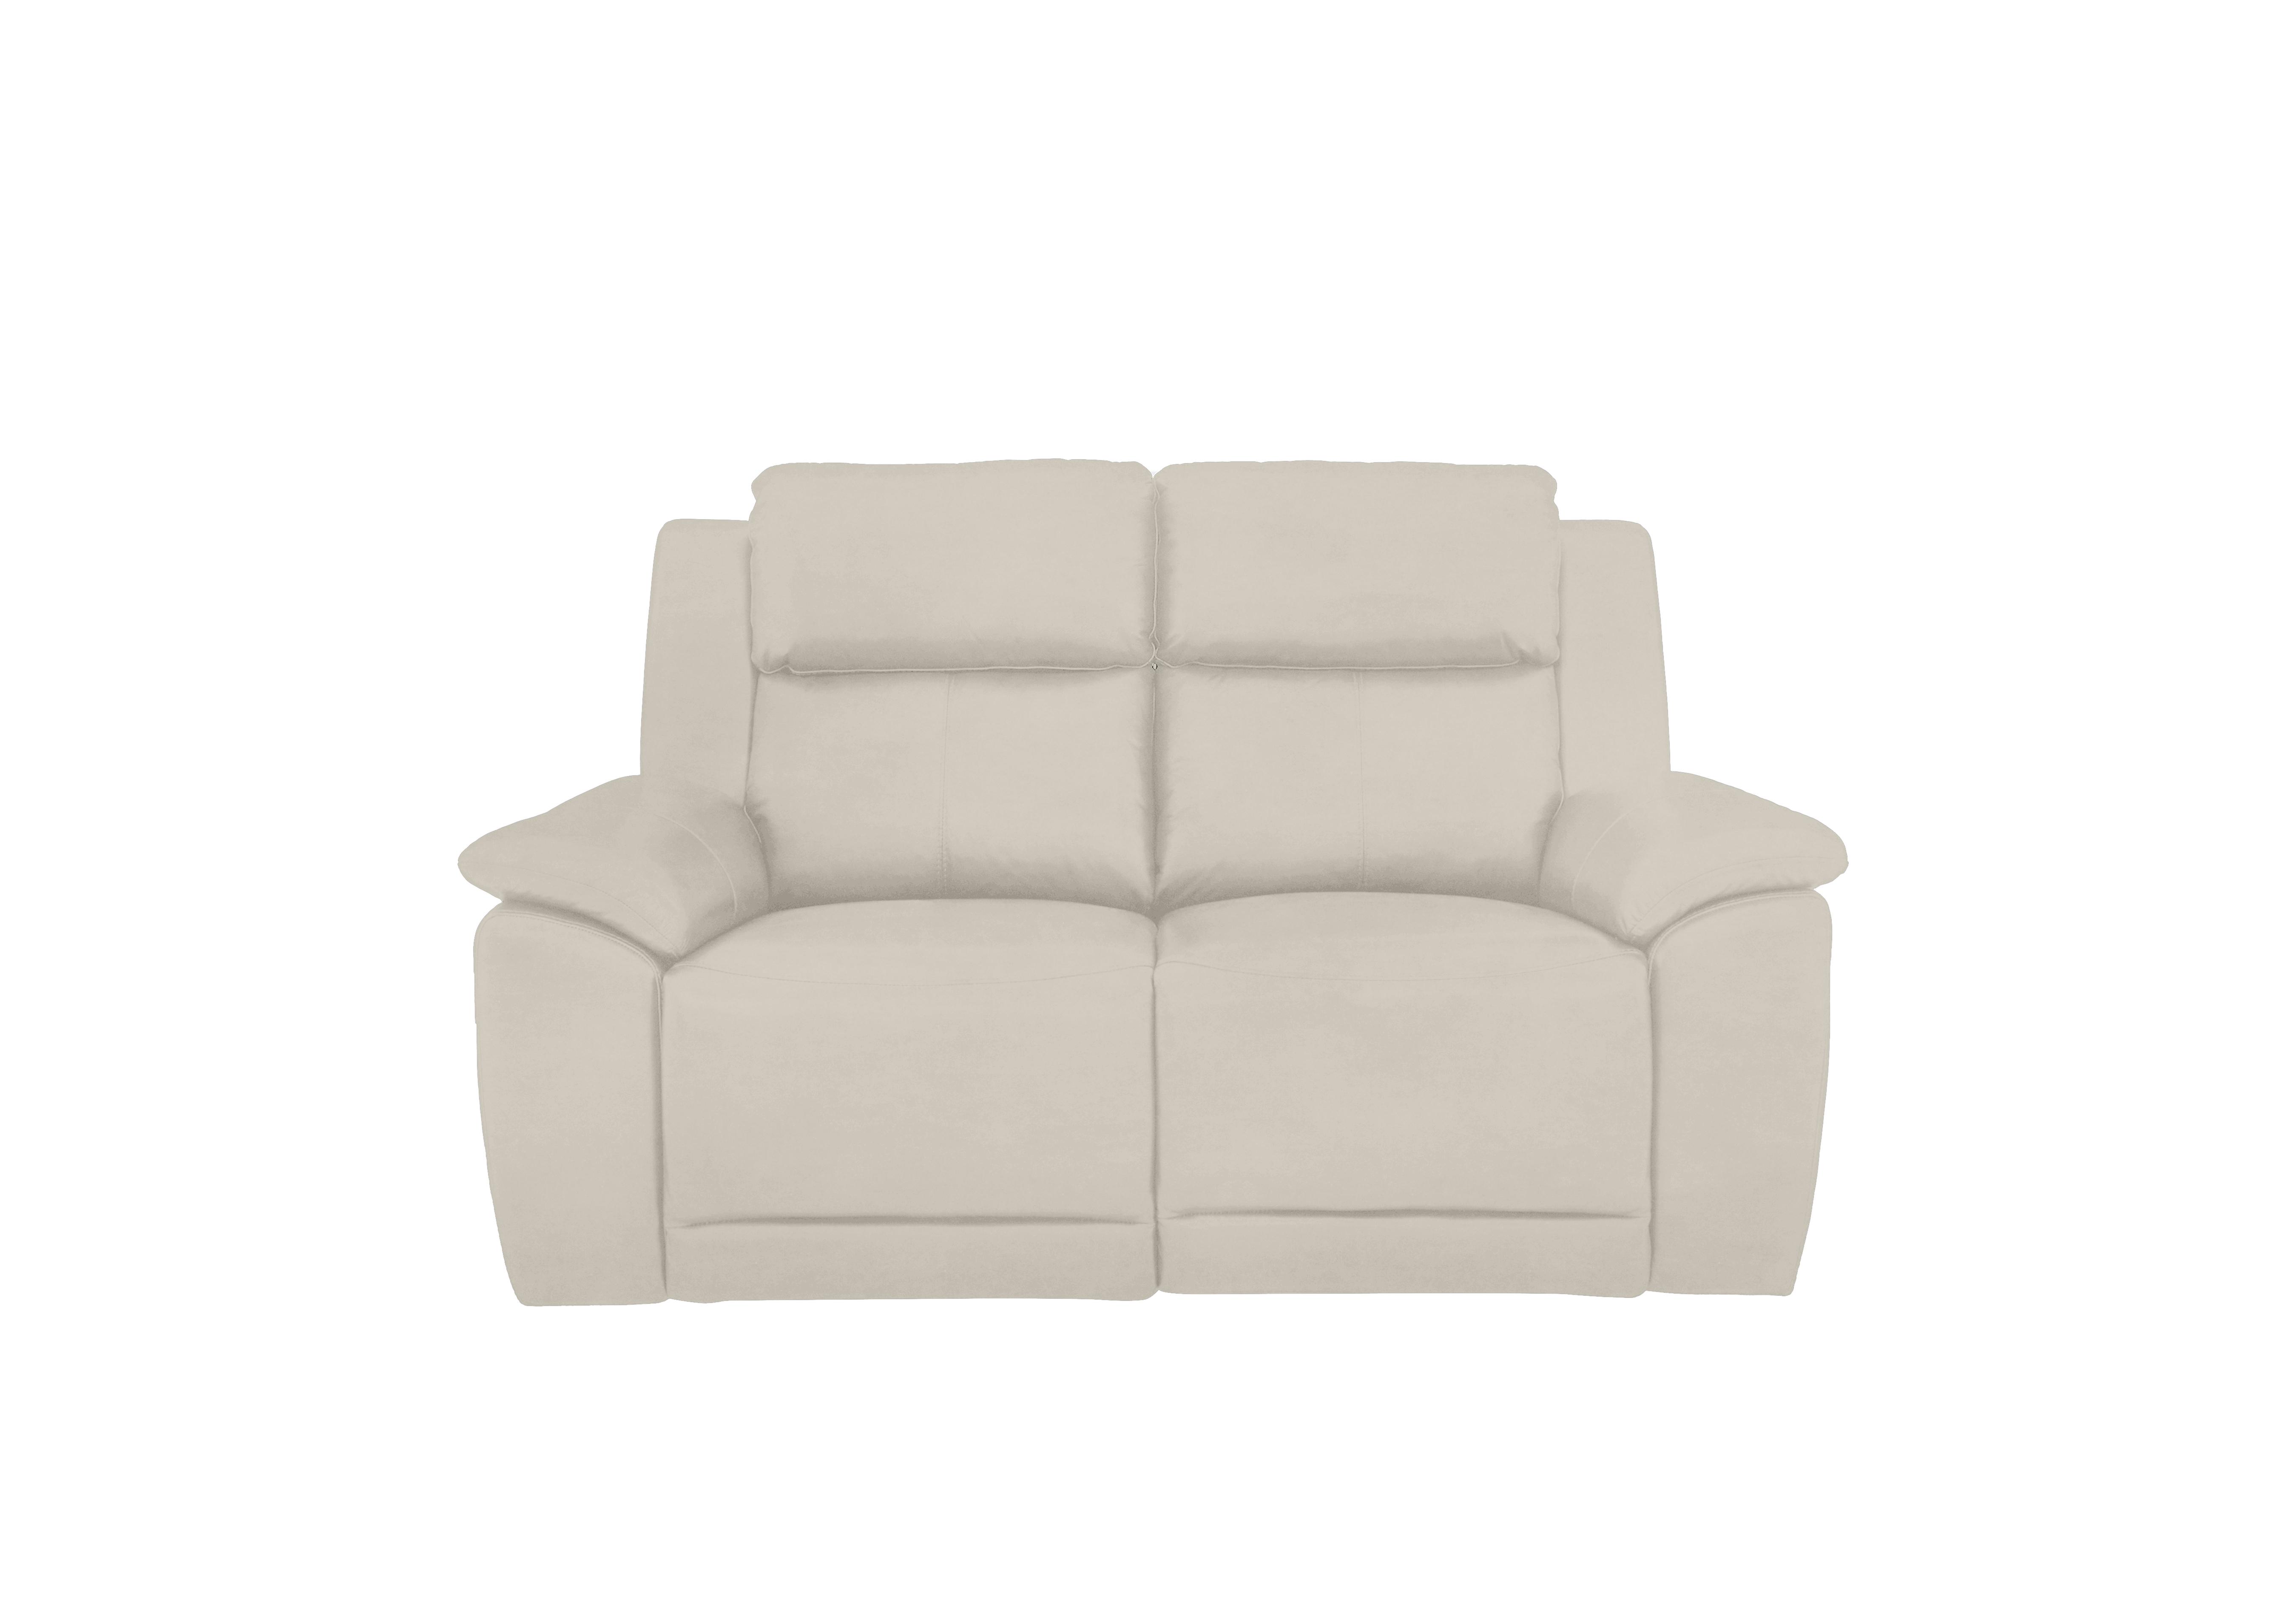 Utah 2 Seater Fabric Power Recliner Sofa with Power Headrests and Power Lumbar in Velvet White Vv-0307 on Furniture Village